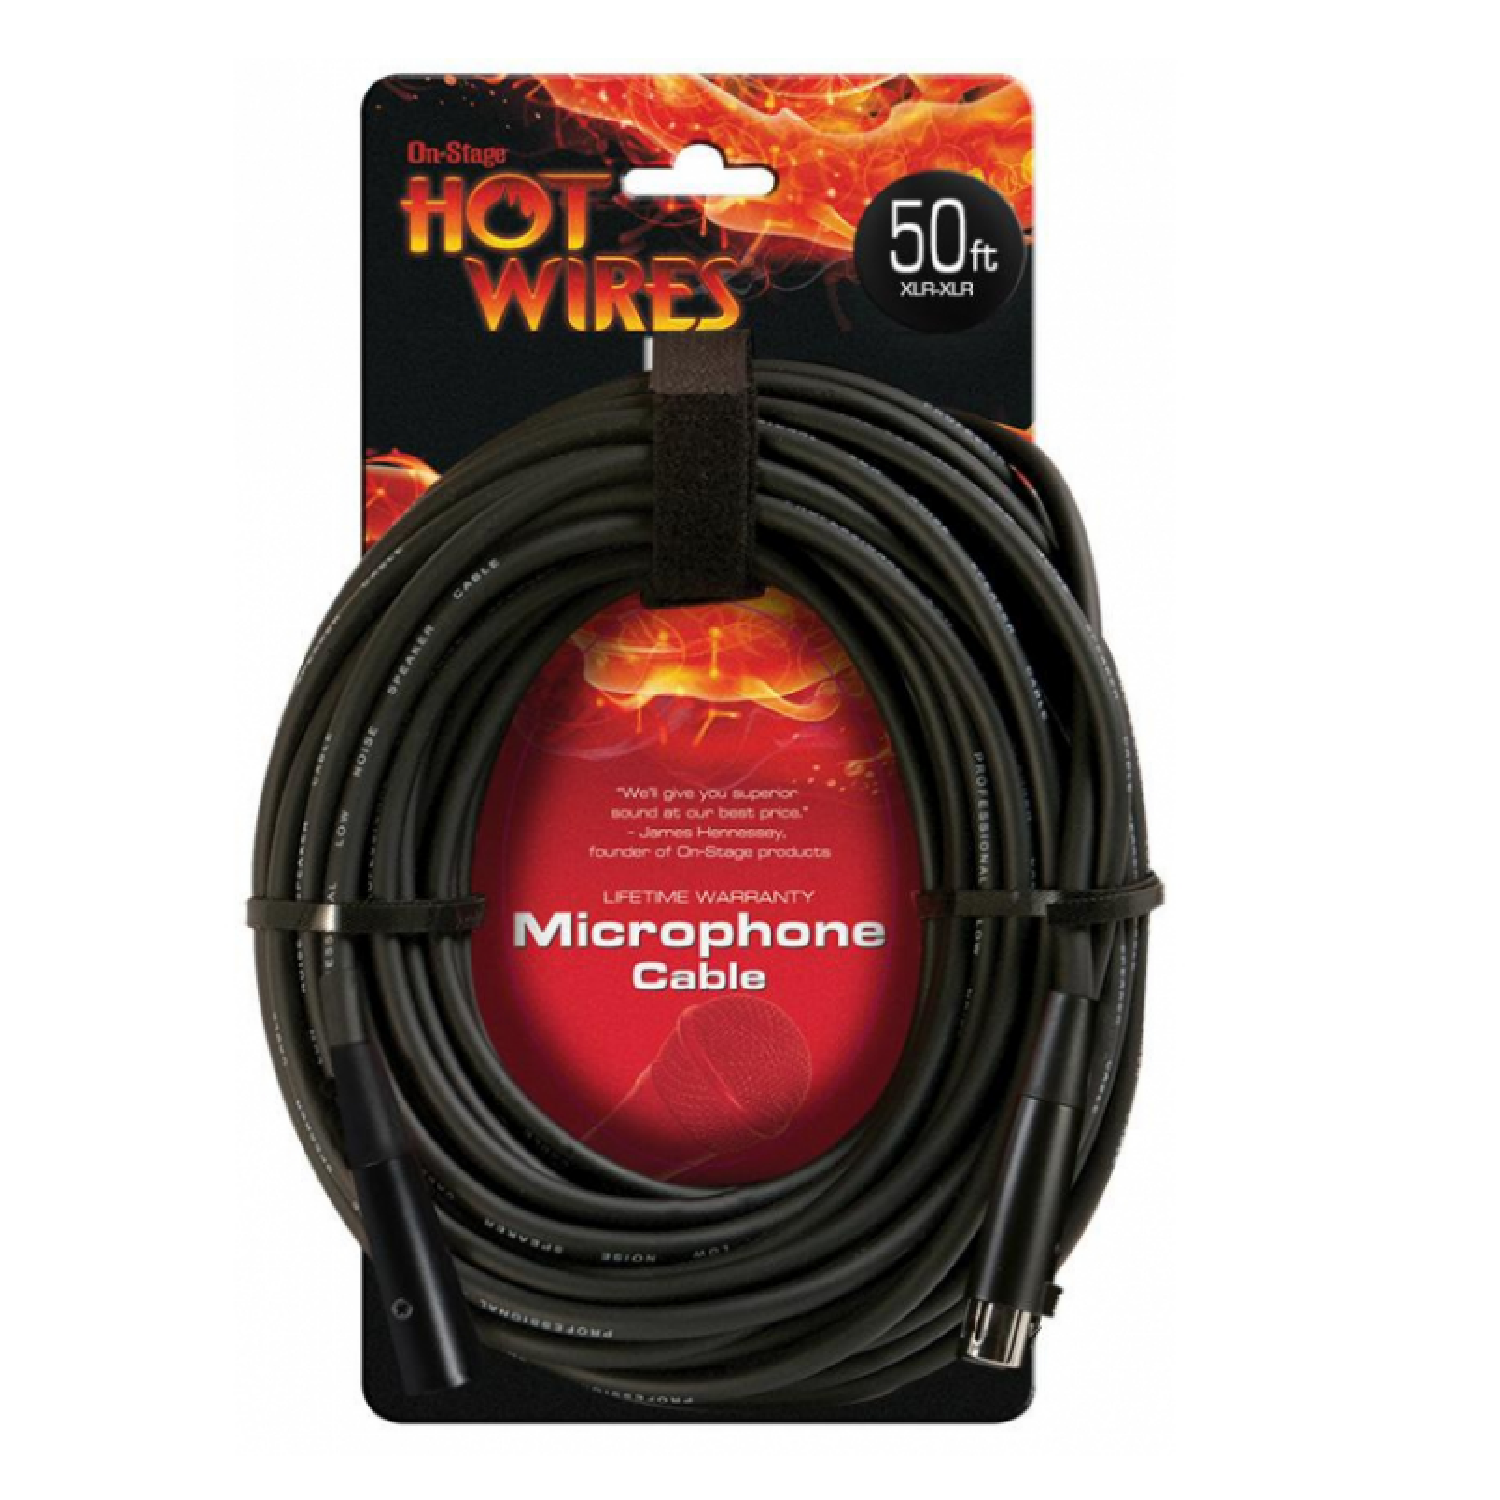 Microphone Cable (50&#039;, XLR-XLR), MC12 50 , On Stage Stands